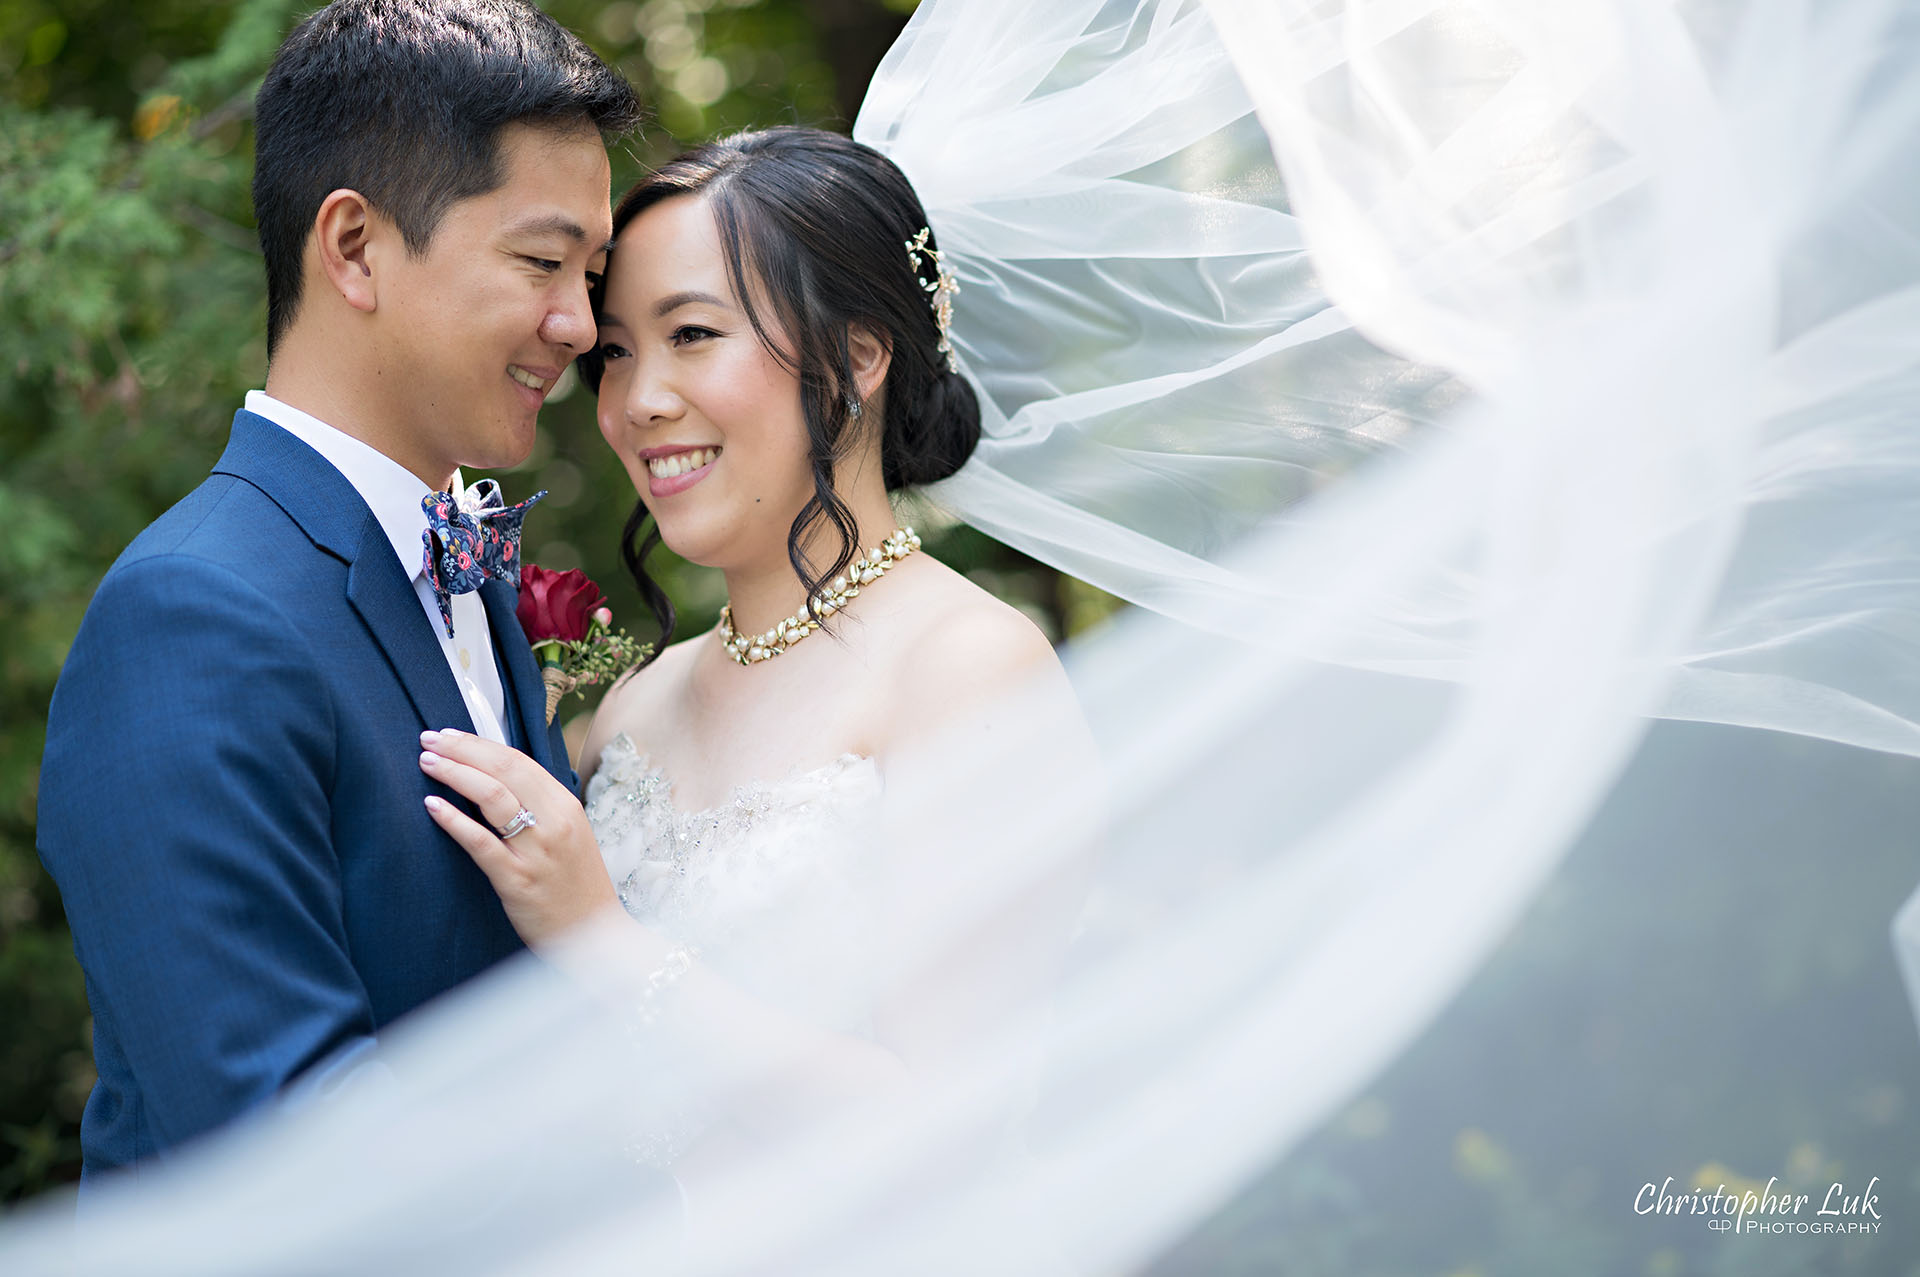 Christopher Luk Toronto Wedding Photographer Bridle Trail Baptist Church Unionville Main Street Crystal Fountain Event Venue Bride Groom Natural Photojournalistic Candid Creative Portrait Session Pictures Forest Park Hug Intimate Flowing Flying Veil 